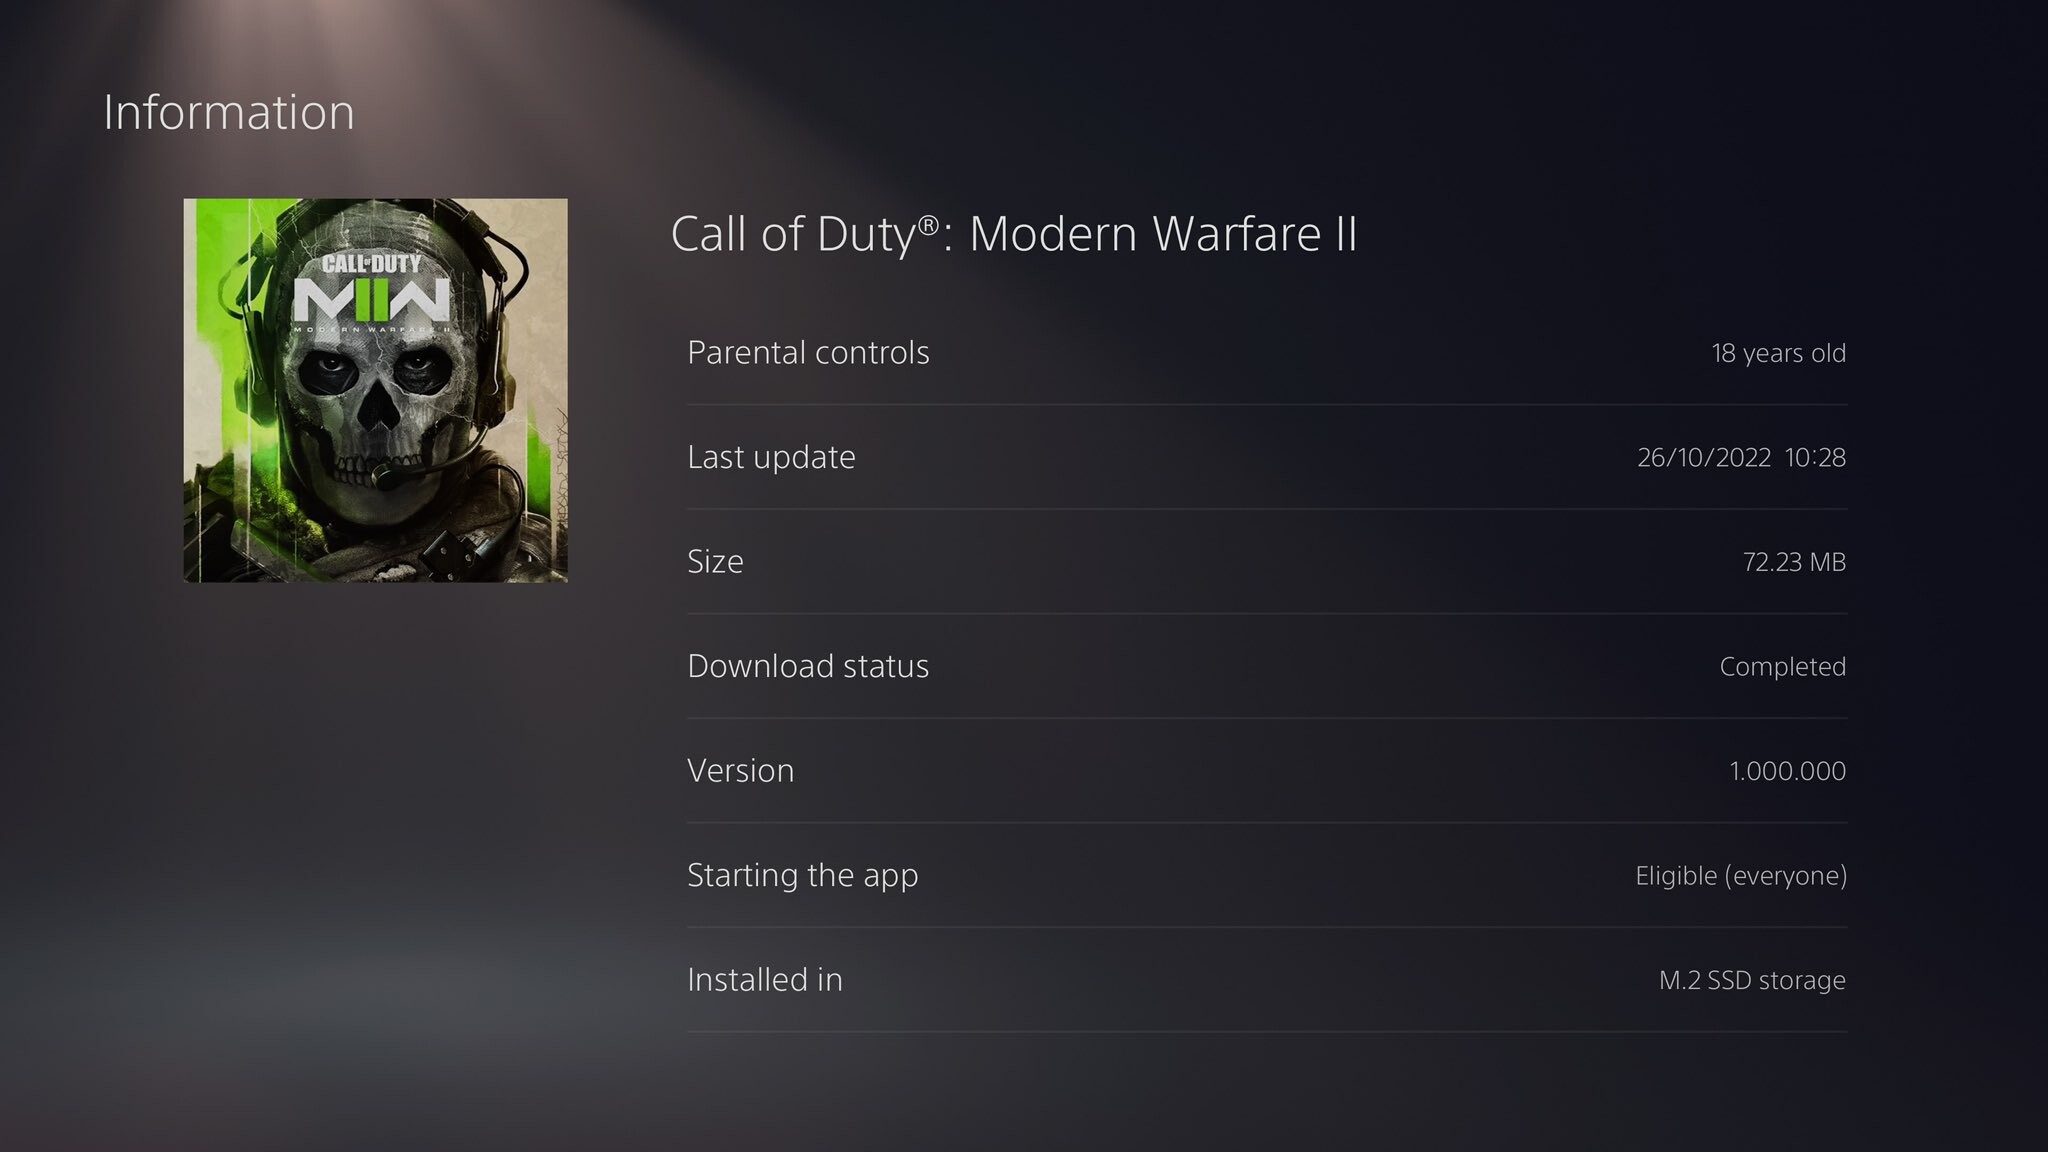 Call of Duty: Modern Warfare 2 - epic that takes games industry to